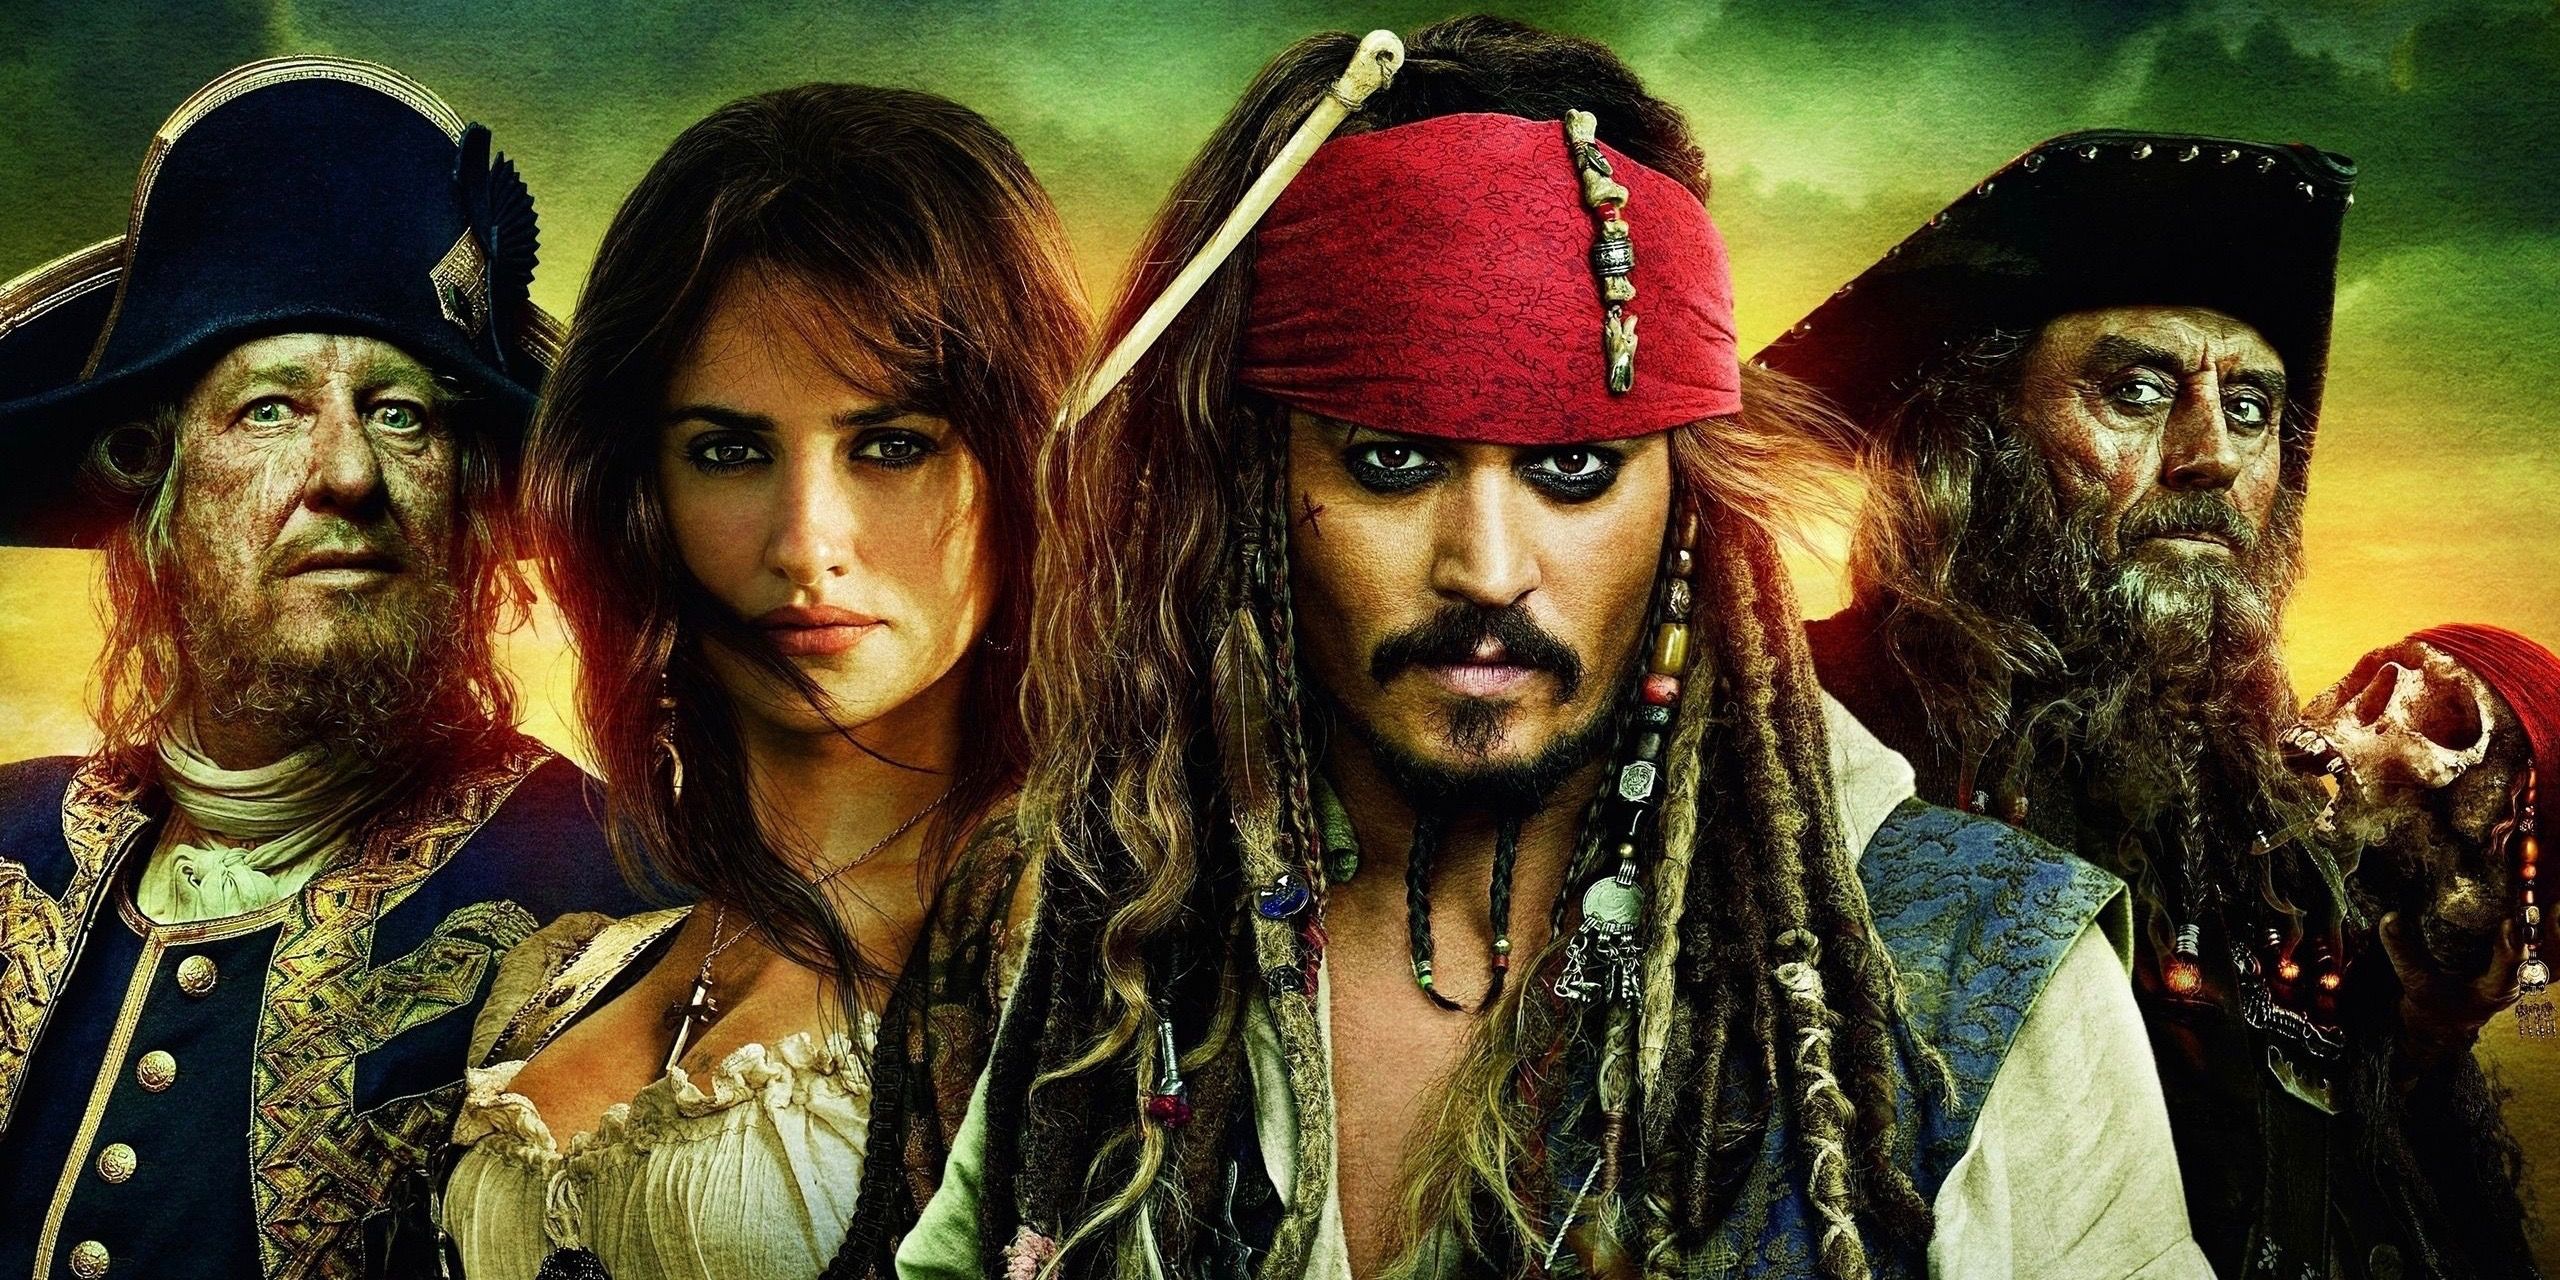 The Pirates of the Caribbean On Stranger Tides